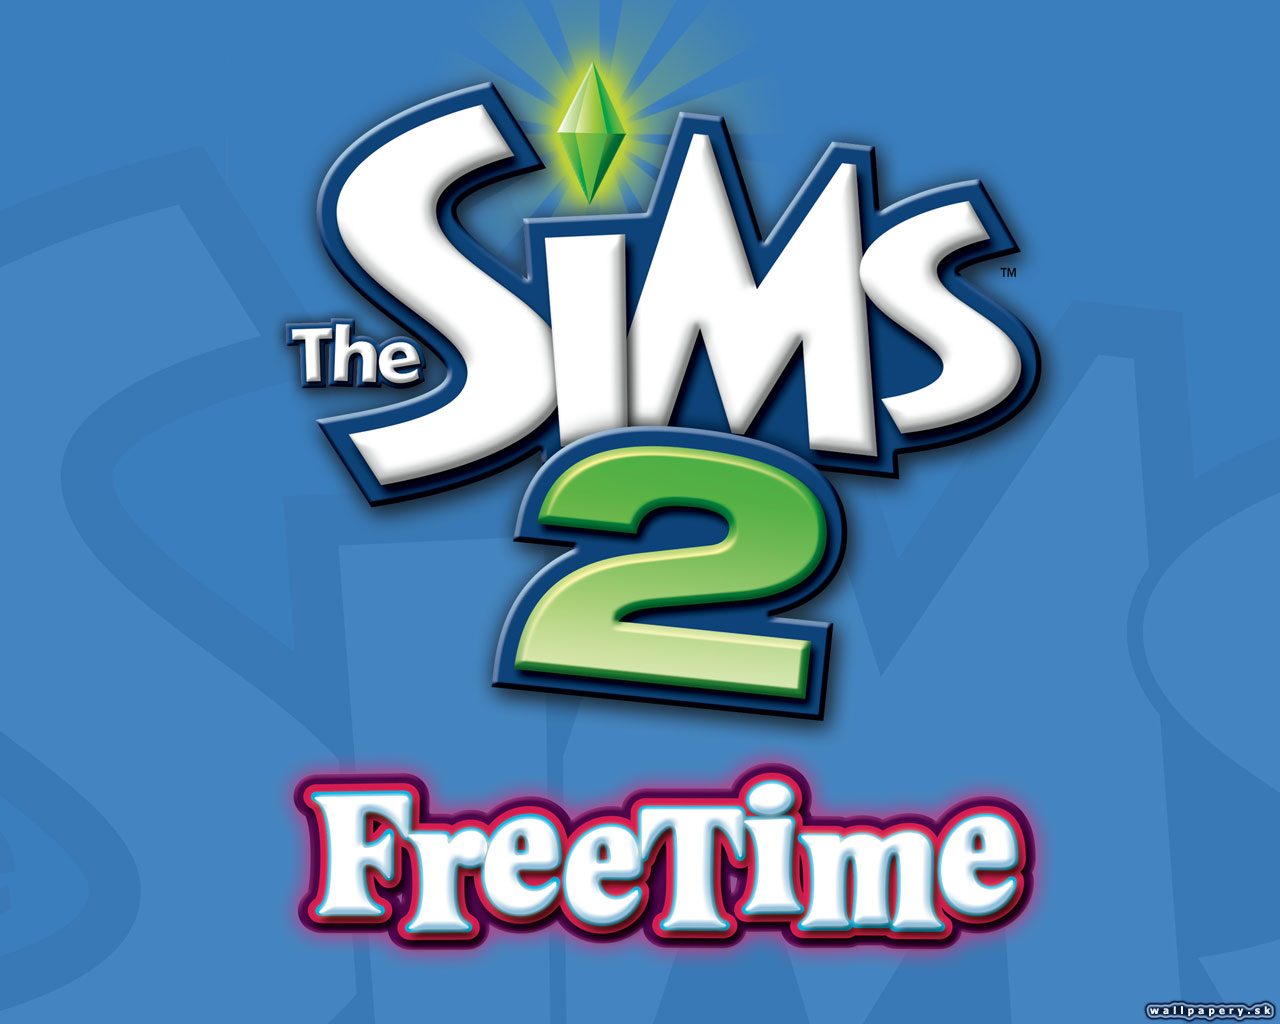 The Sims 2: Free Time - wallpaper 4